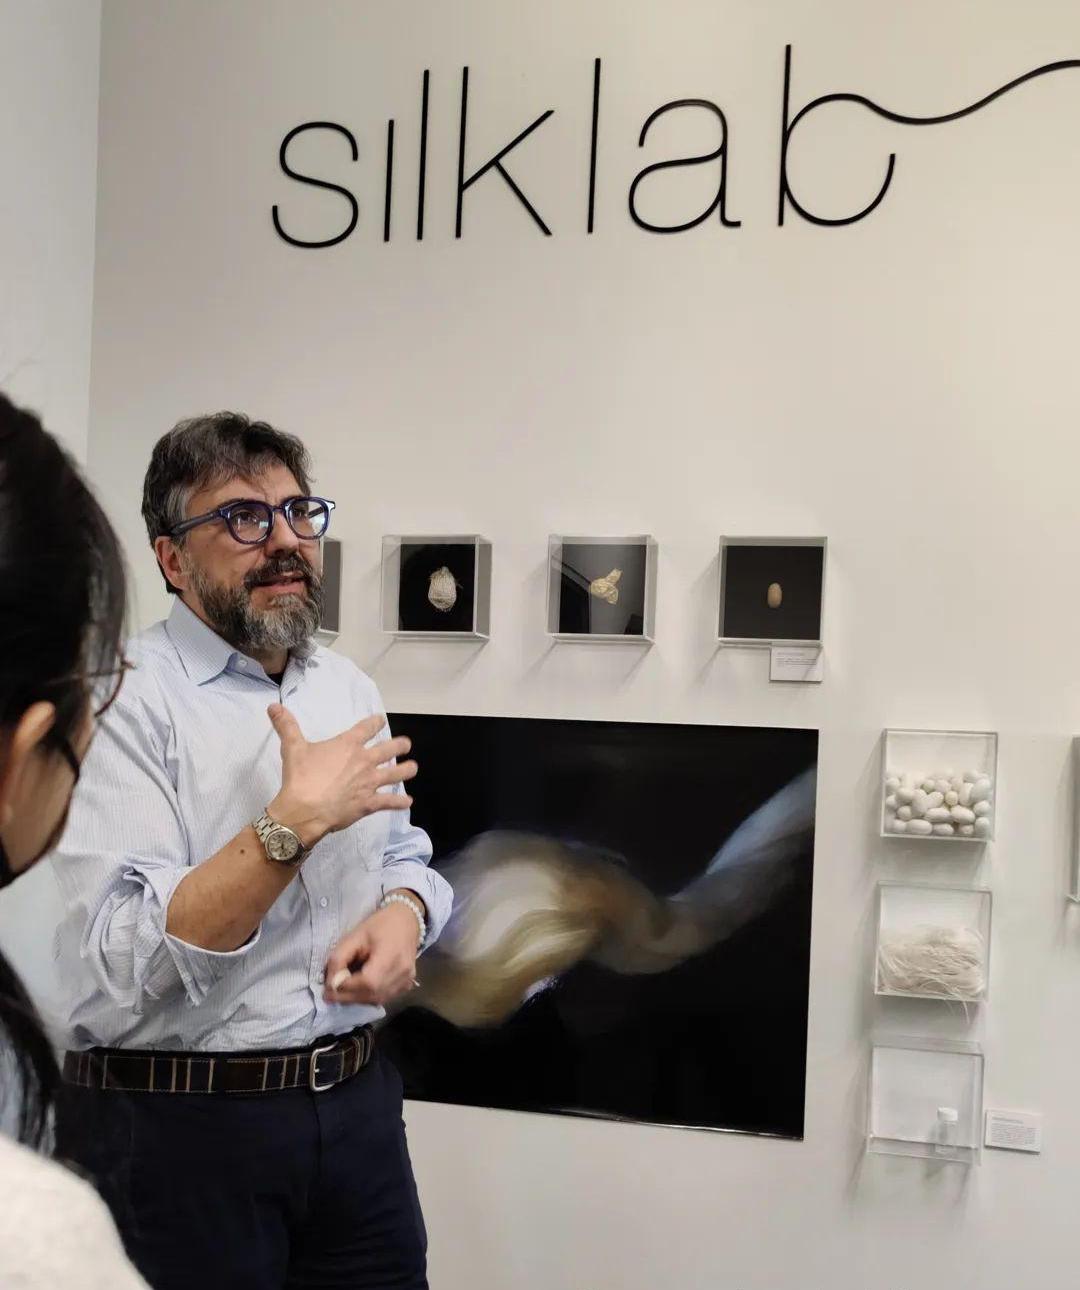 Fio Omenetto stands in front of one of the wall displays at Silklab, mid-explanation. Behind him are small square display cases that house examples of the silk at different stages of processing.